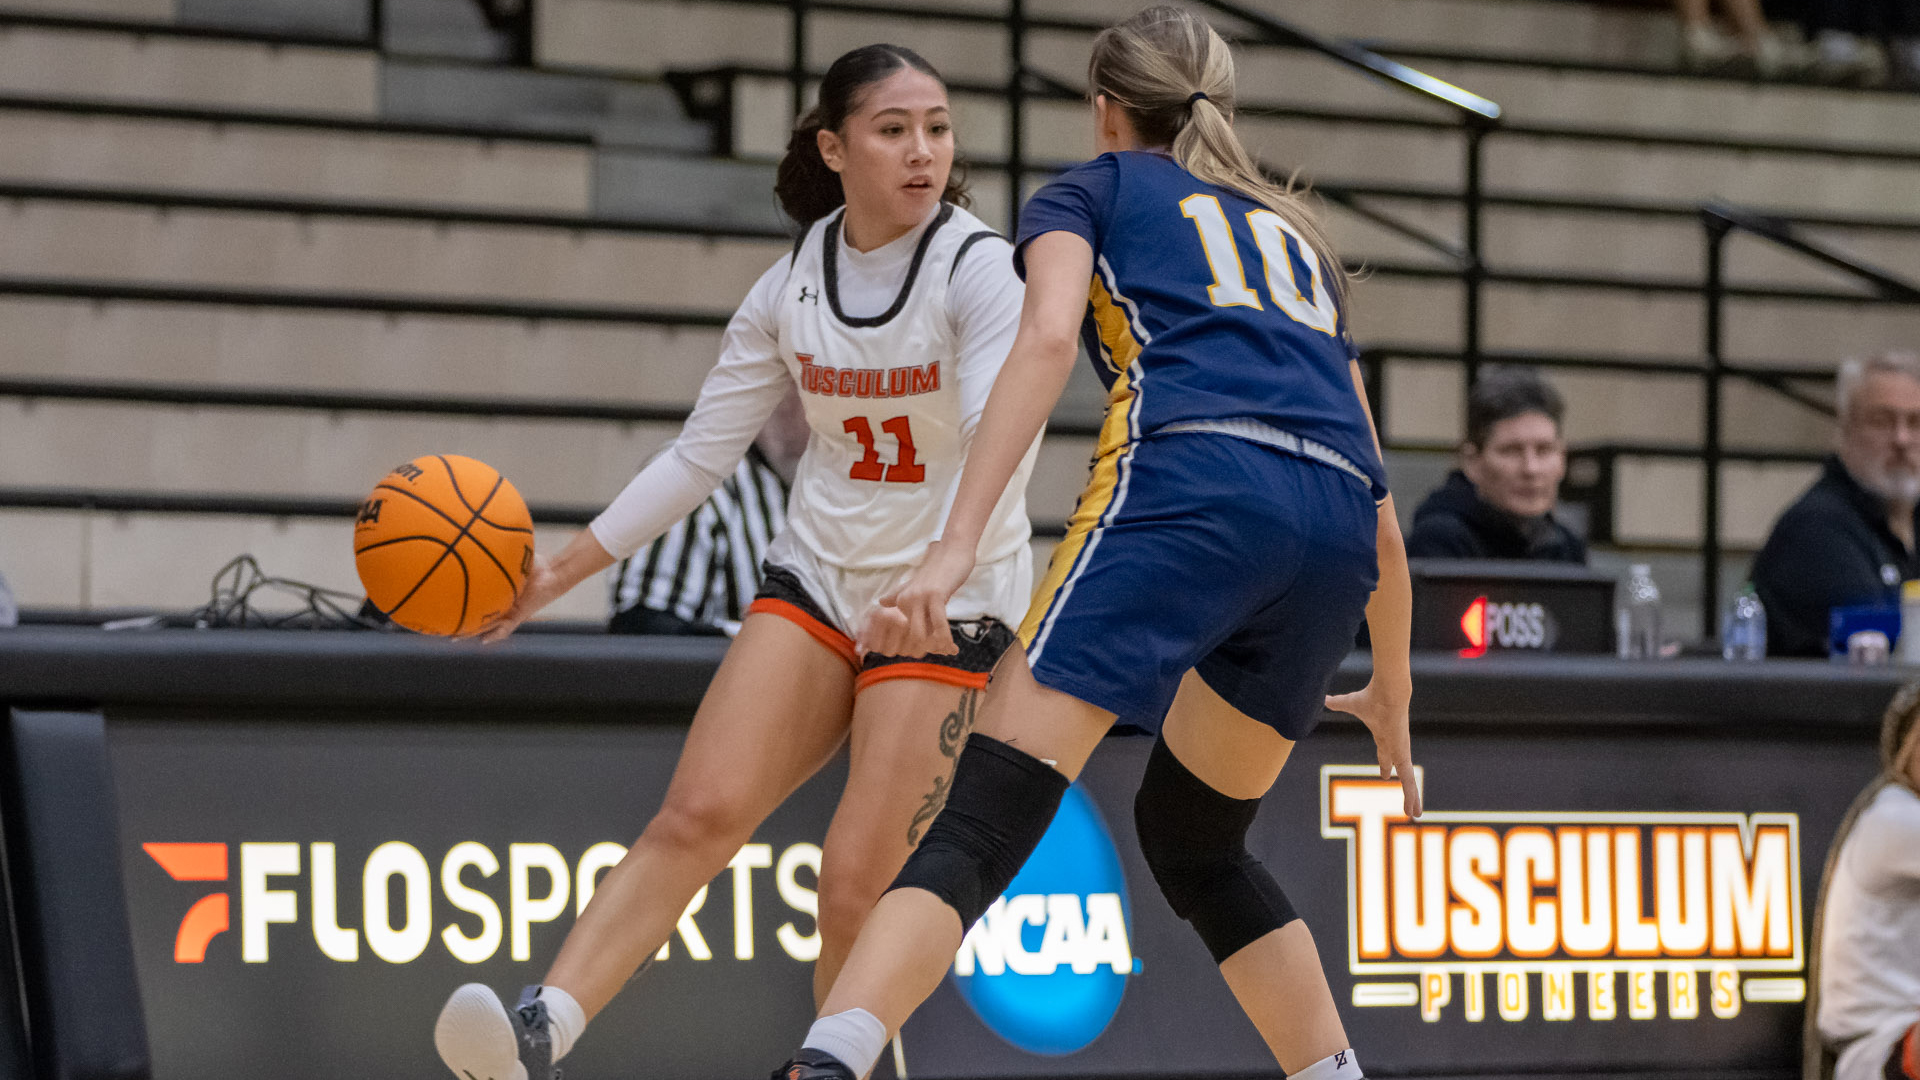 Monique Shim scored a season-high 18 points for the Pioneers against Emory & Henry (photo by Kari Ham).